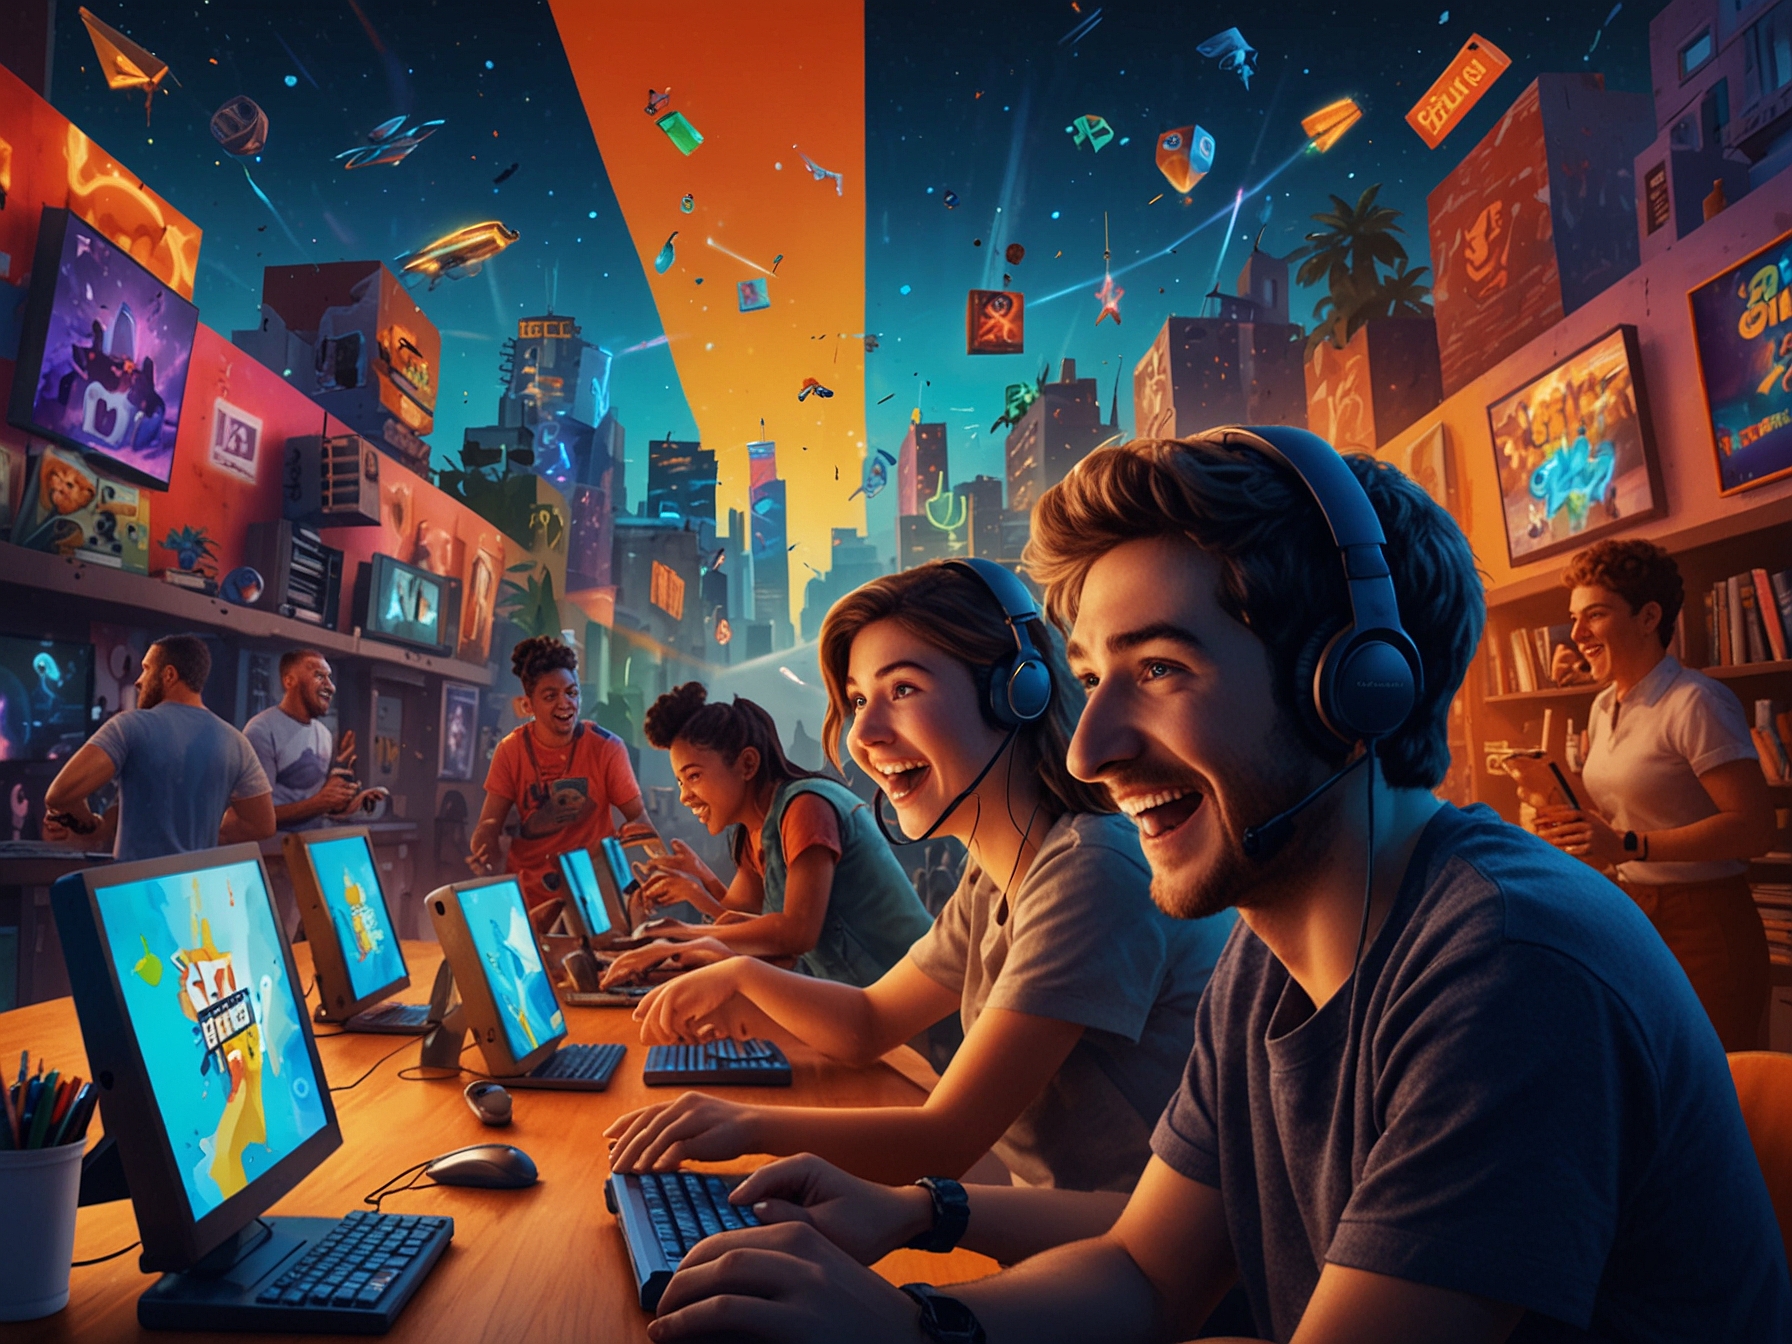 A vibrant collage depicting excited gamers experiencing different free games from Amazon Prime's offerings, set against a backdrop of the iconic Amazon Prime Day promotional imagery.